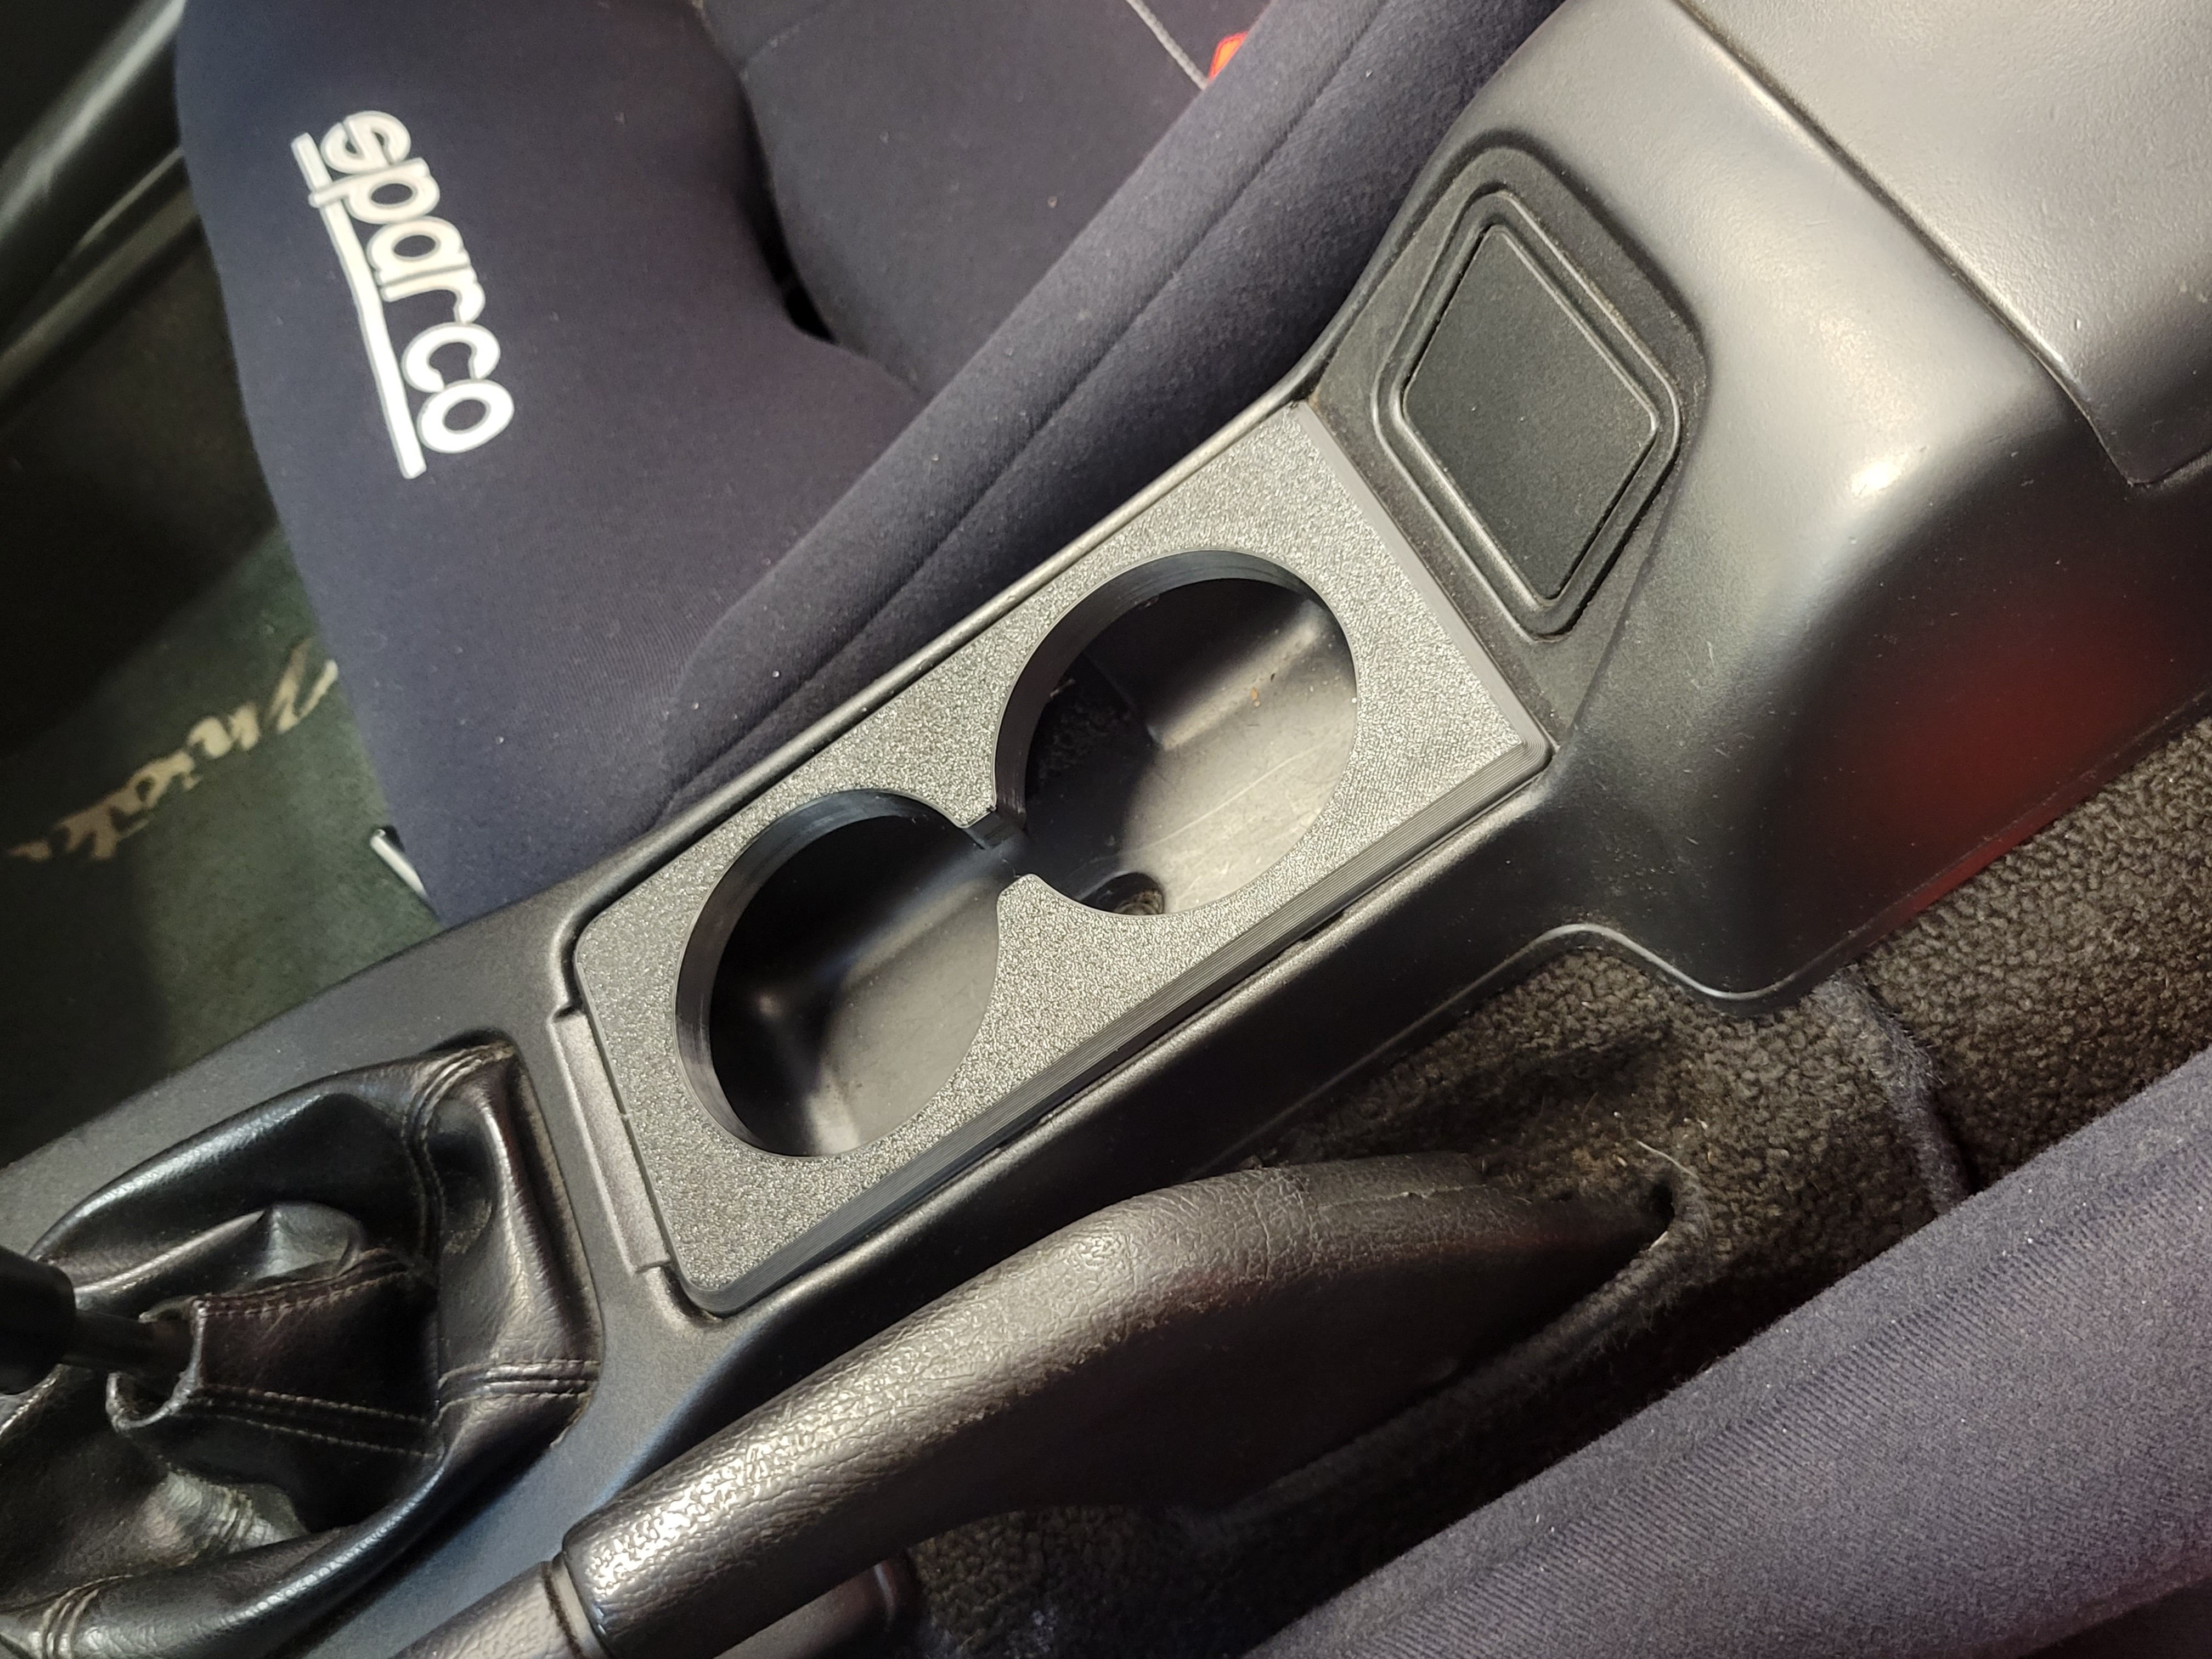 NA center console cupholder